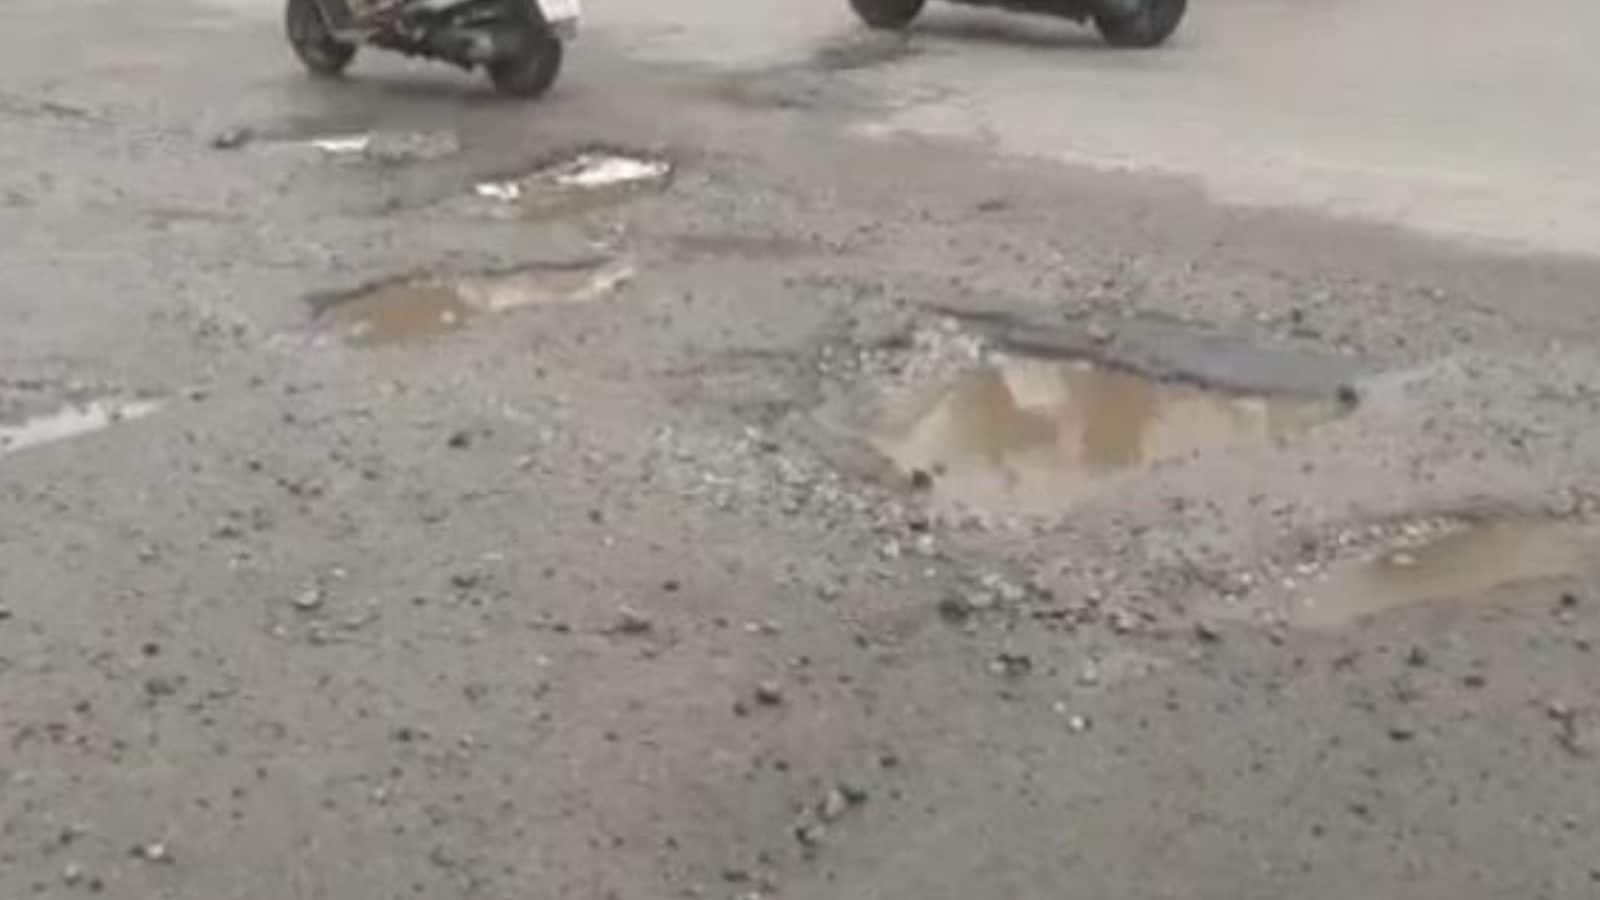 Schoolboy Fills Pothole After Grandfather Suffers Fracture in Mishap